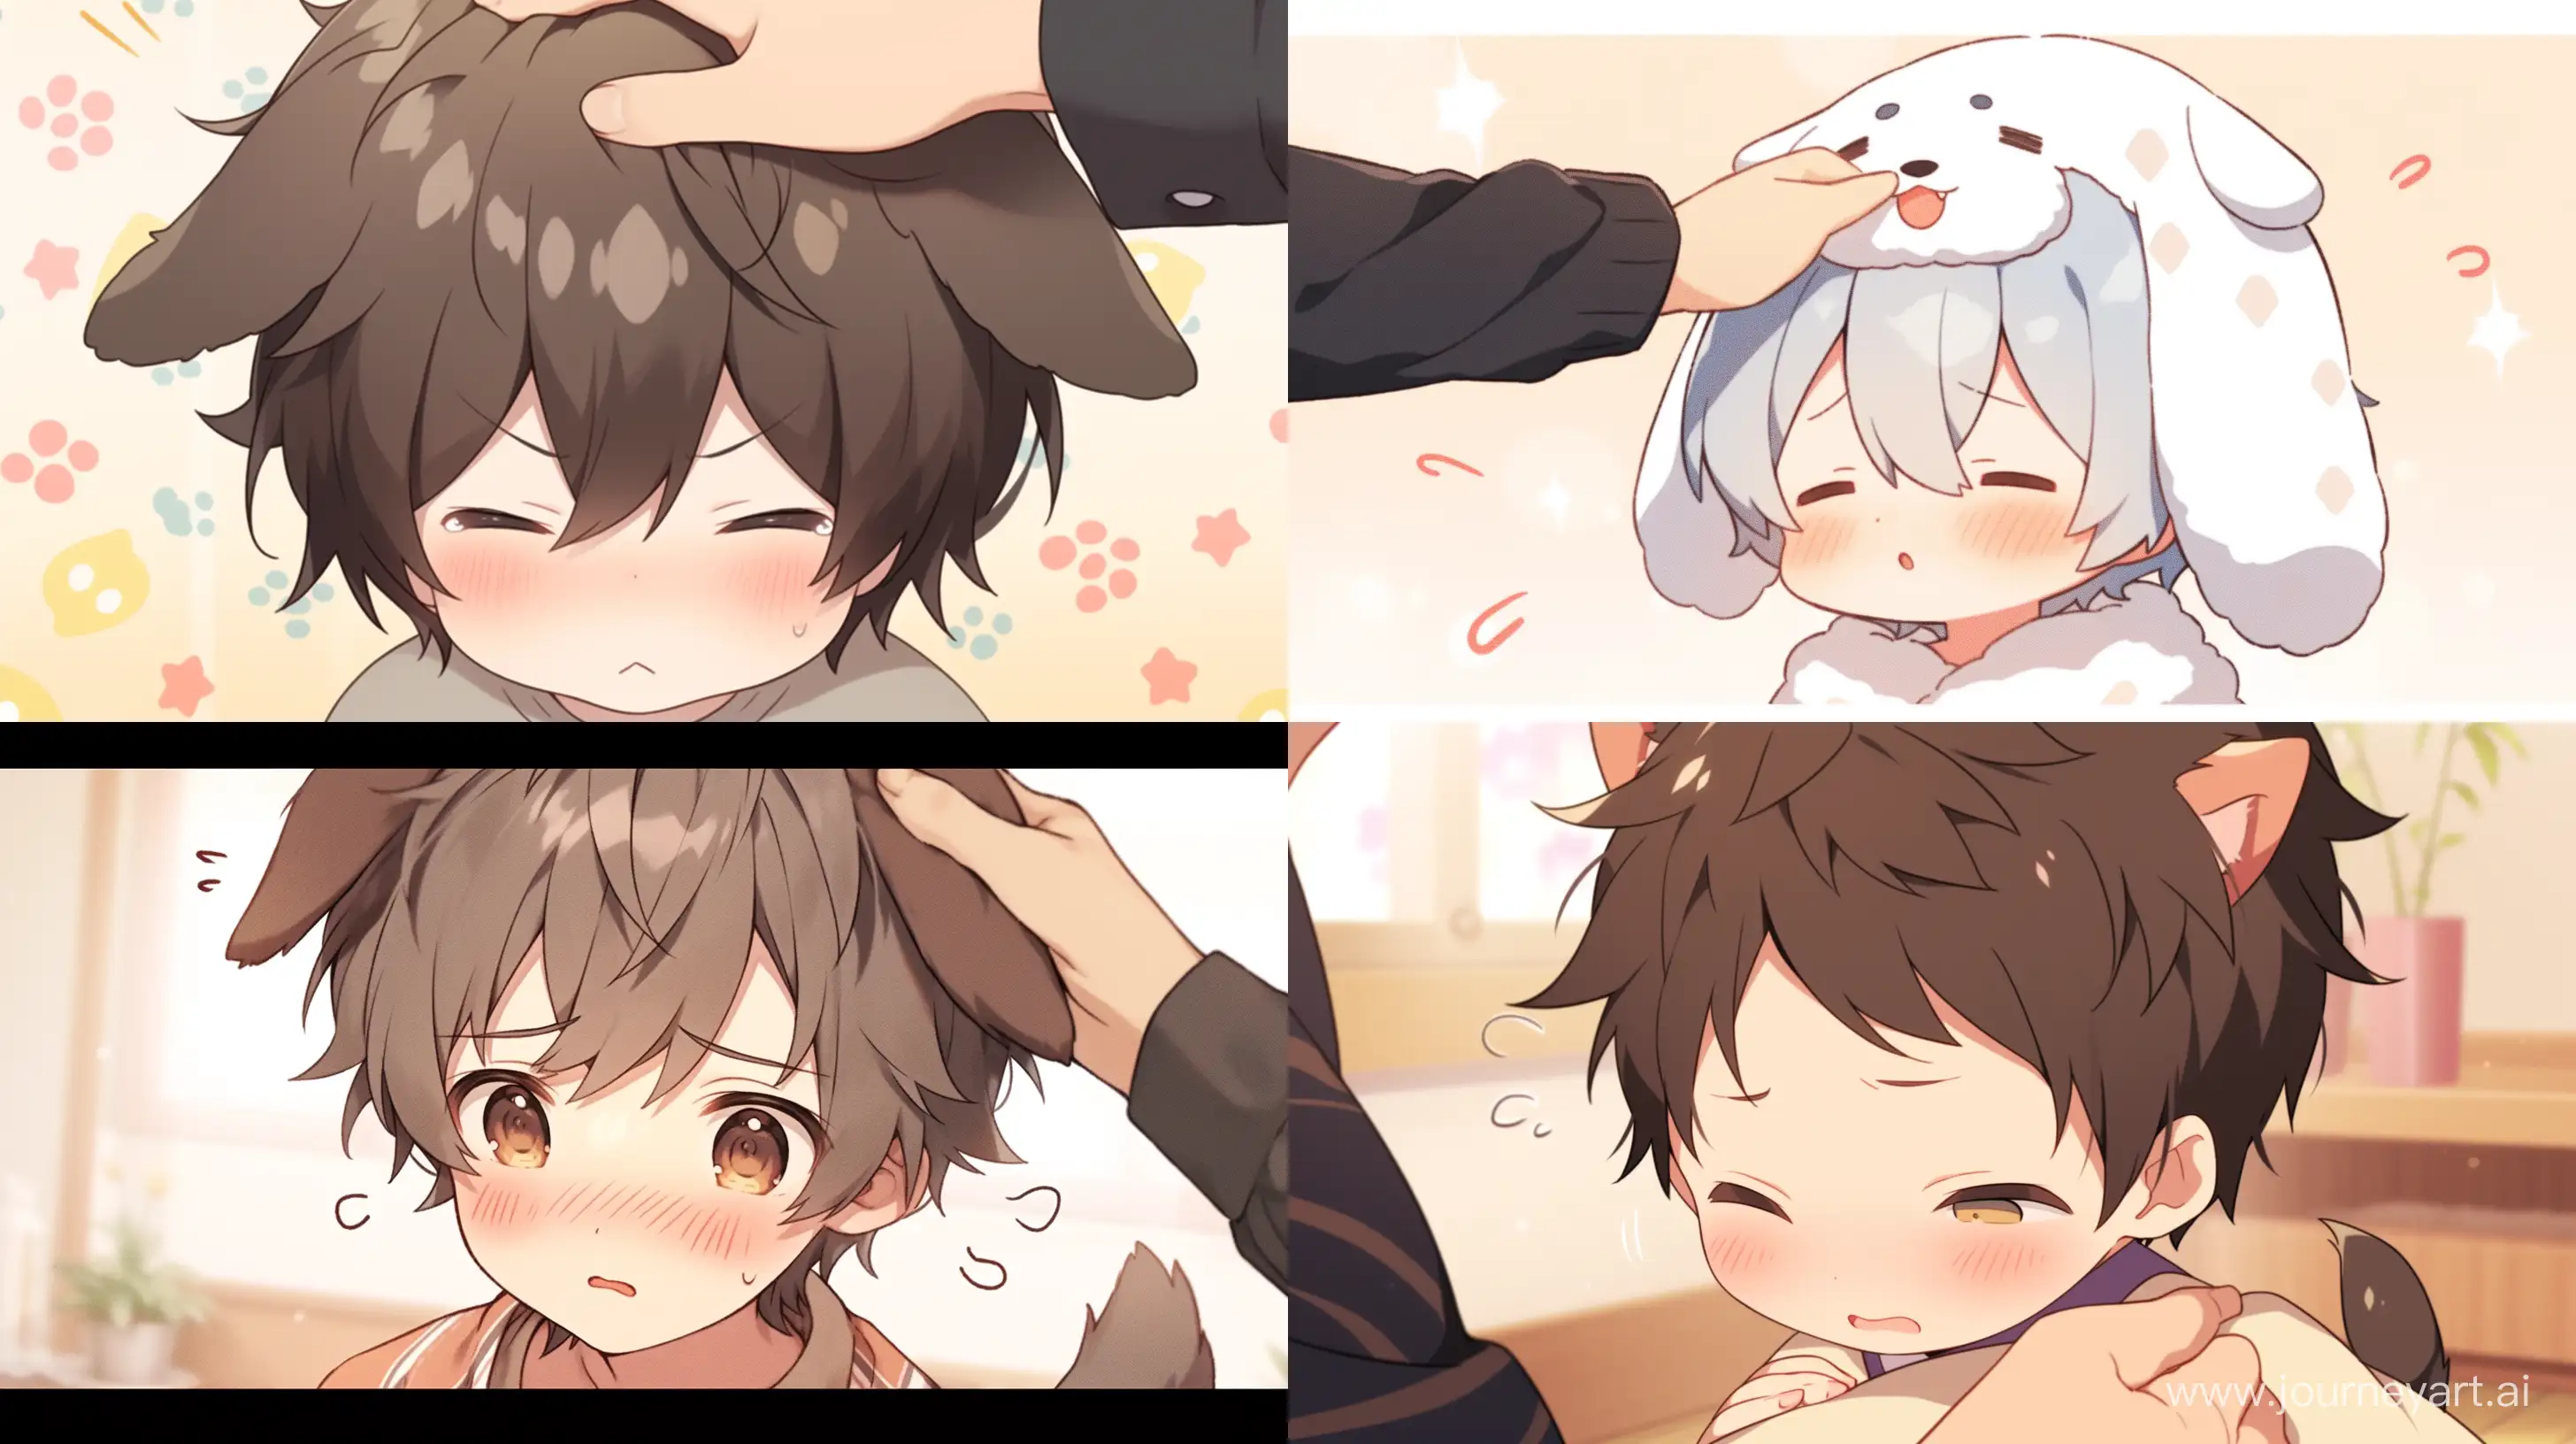 Satisfied-Chibi-Boy-Receives-Head-Pat-in-Anime-Style